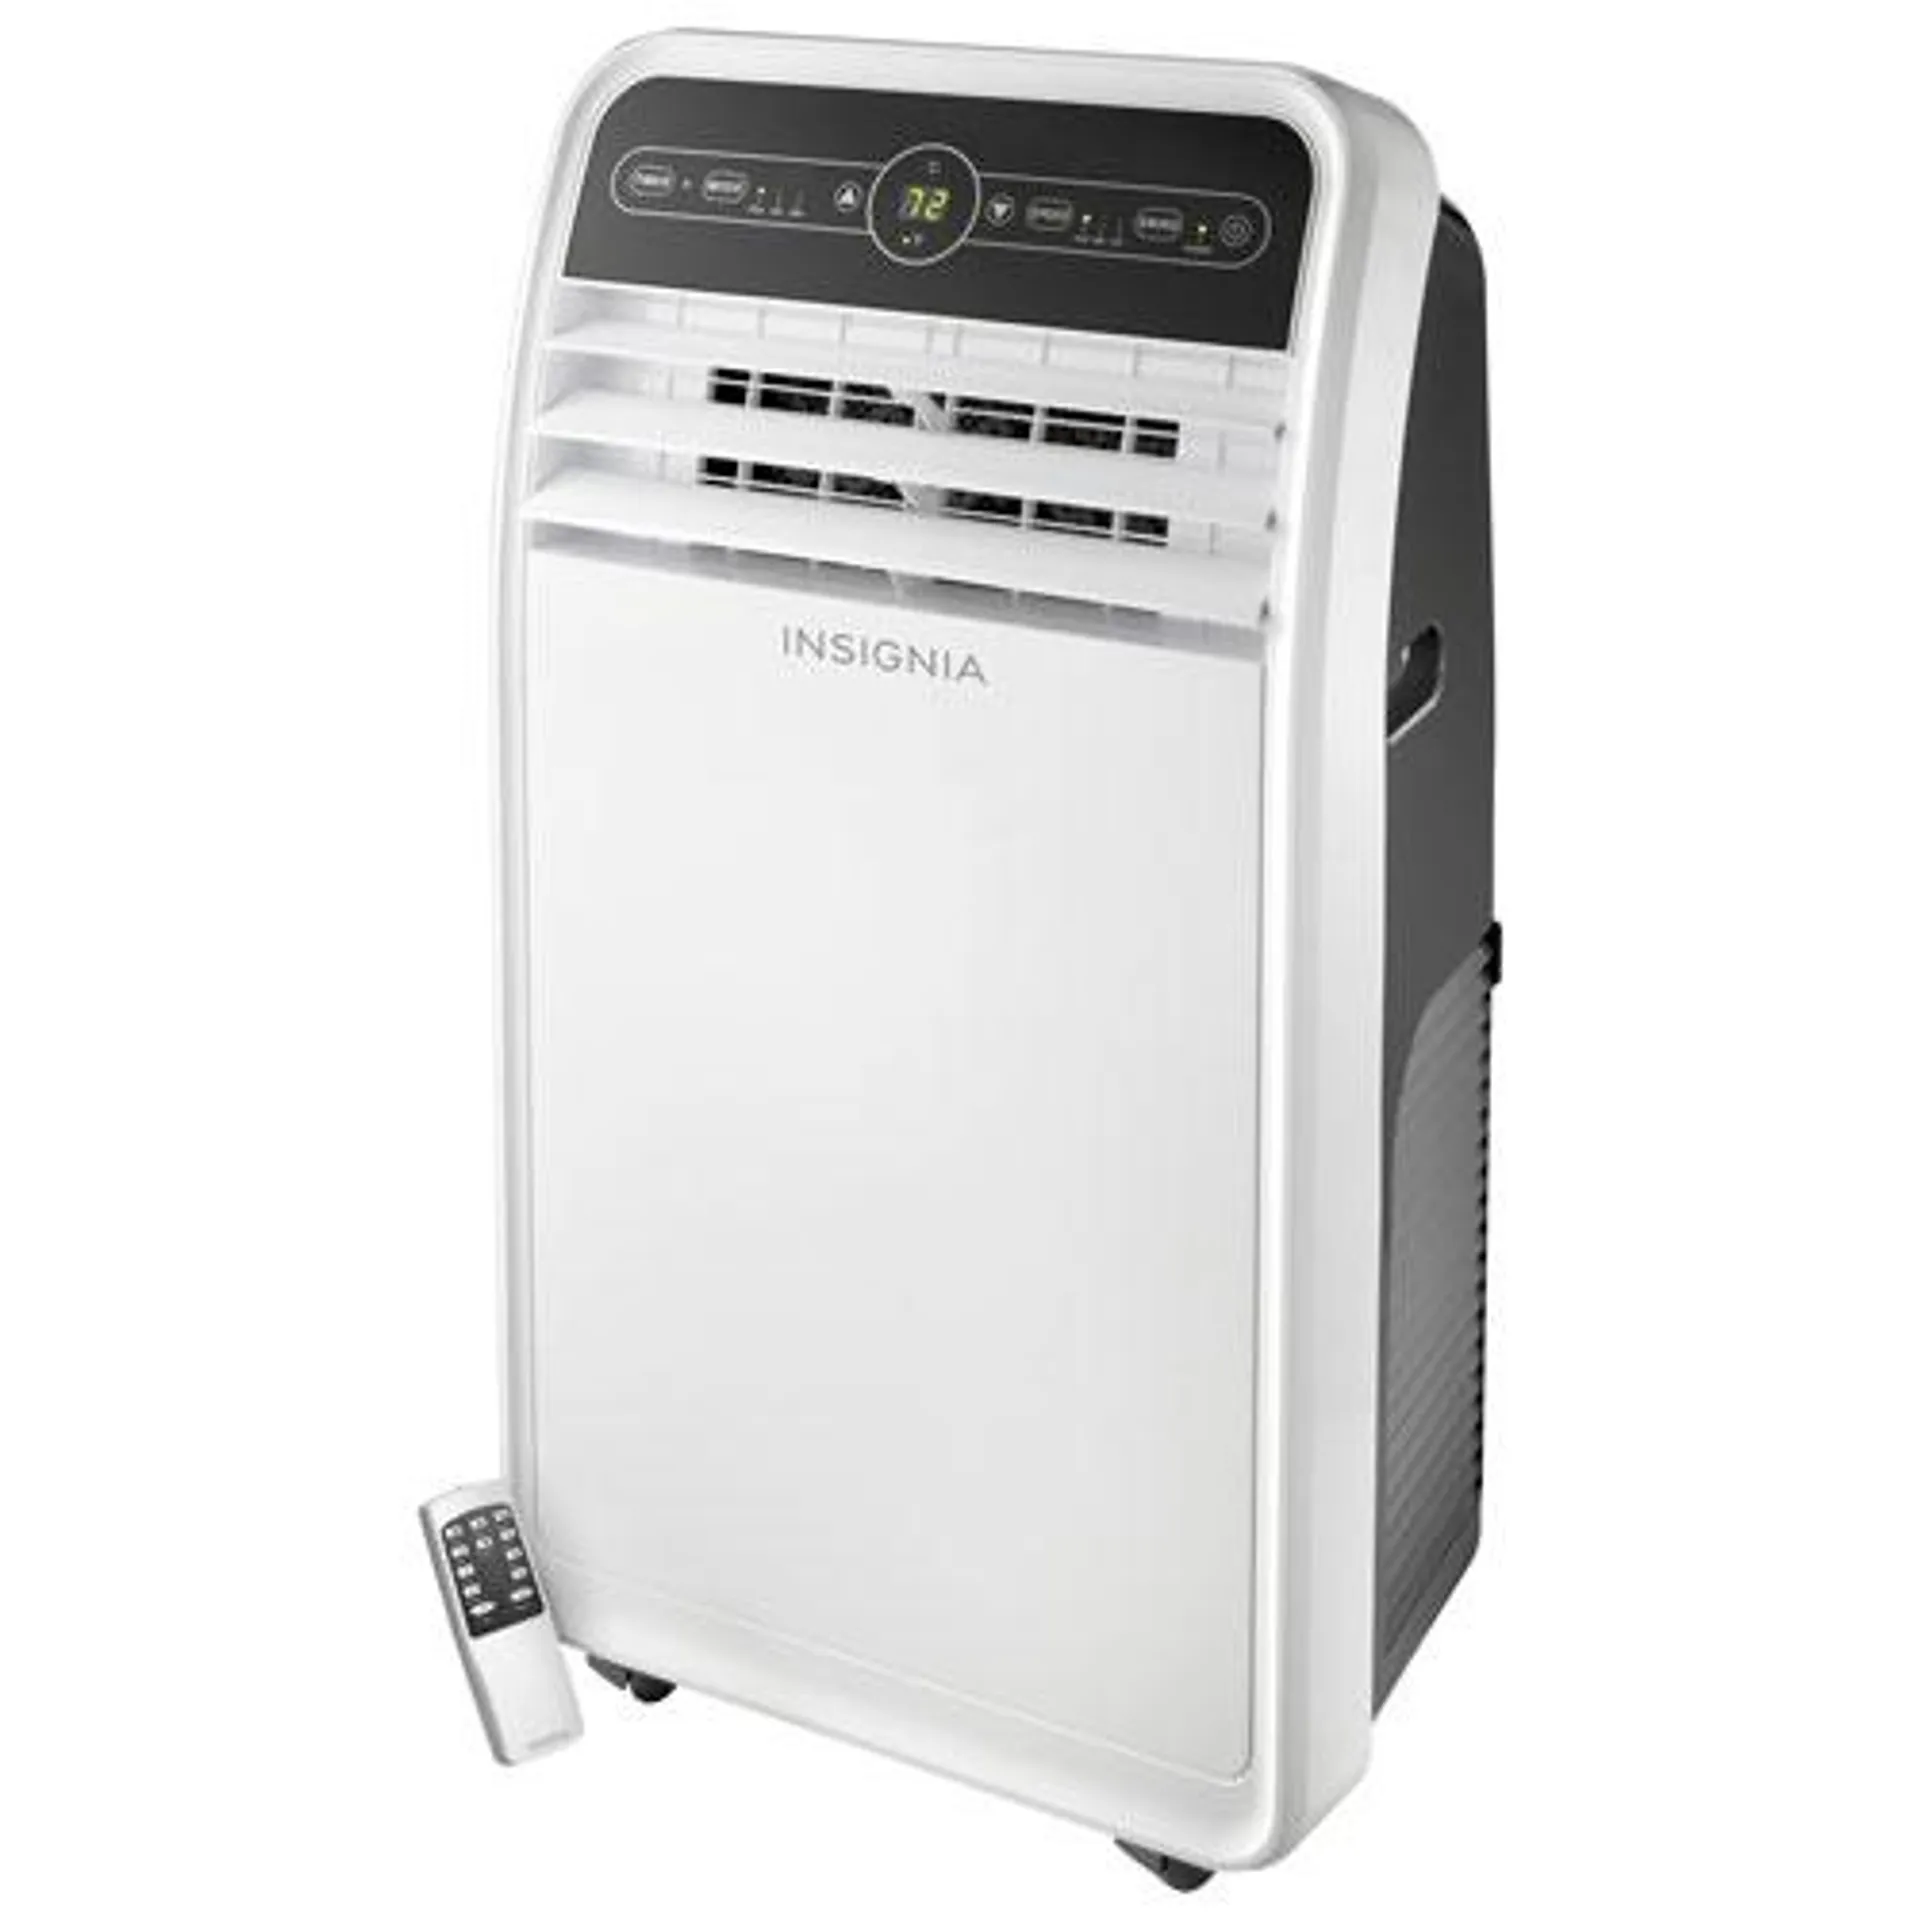 Insignia Portable Air Conditioner - 12000 BTU (SACC 7500 BTU) - White/Grey - Only at Best Buy